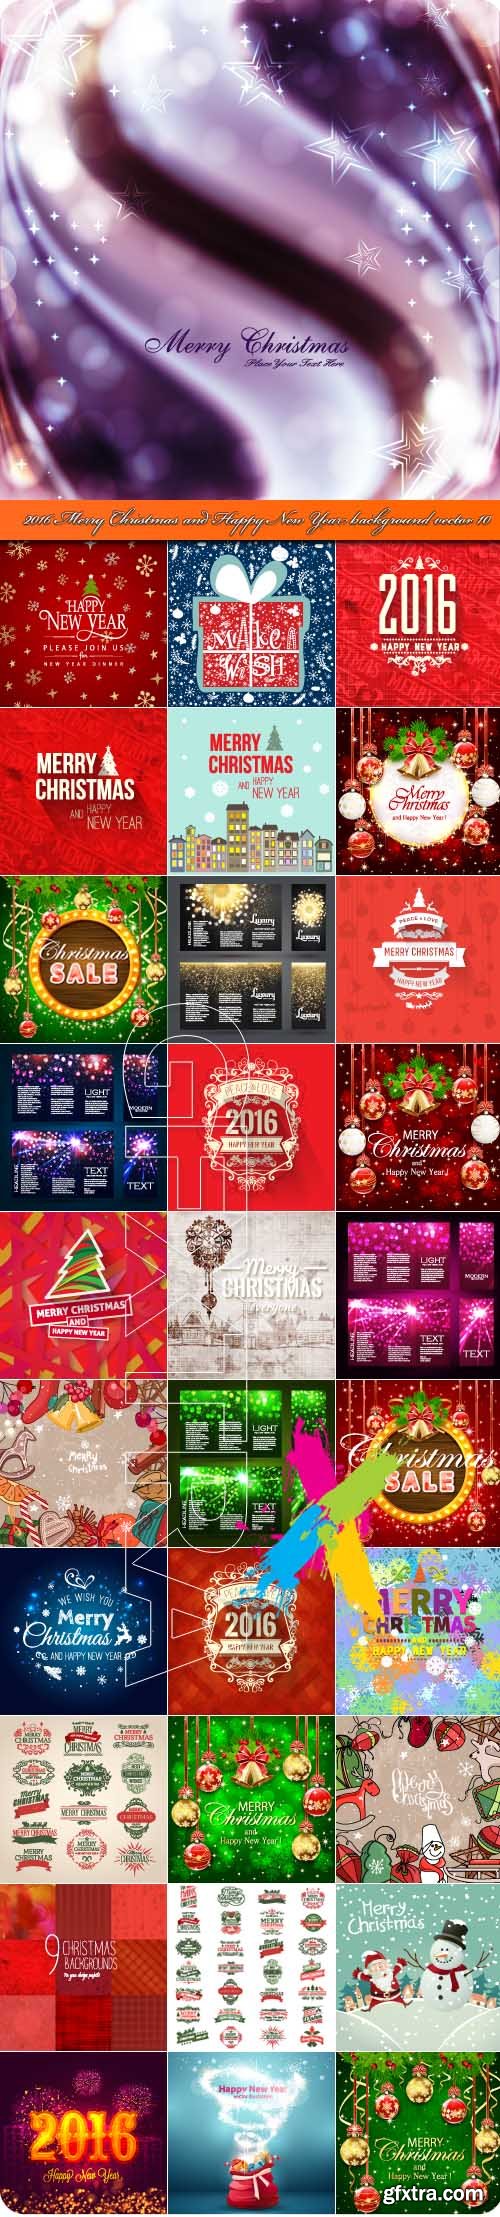 2016 Merry Christmas and Happy New Year background vector 10